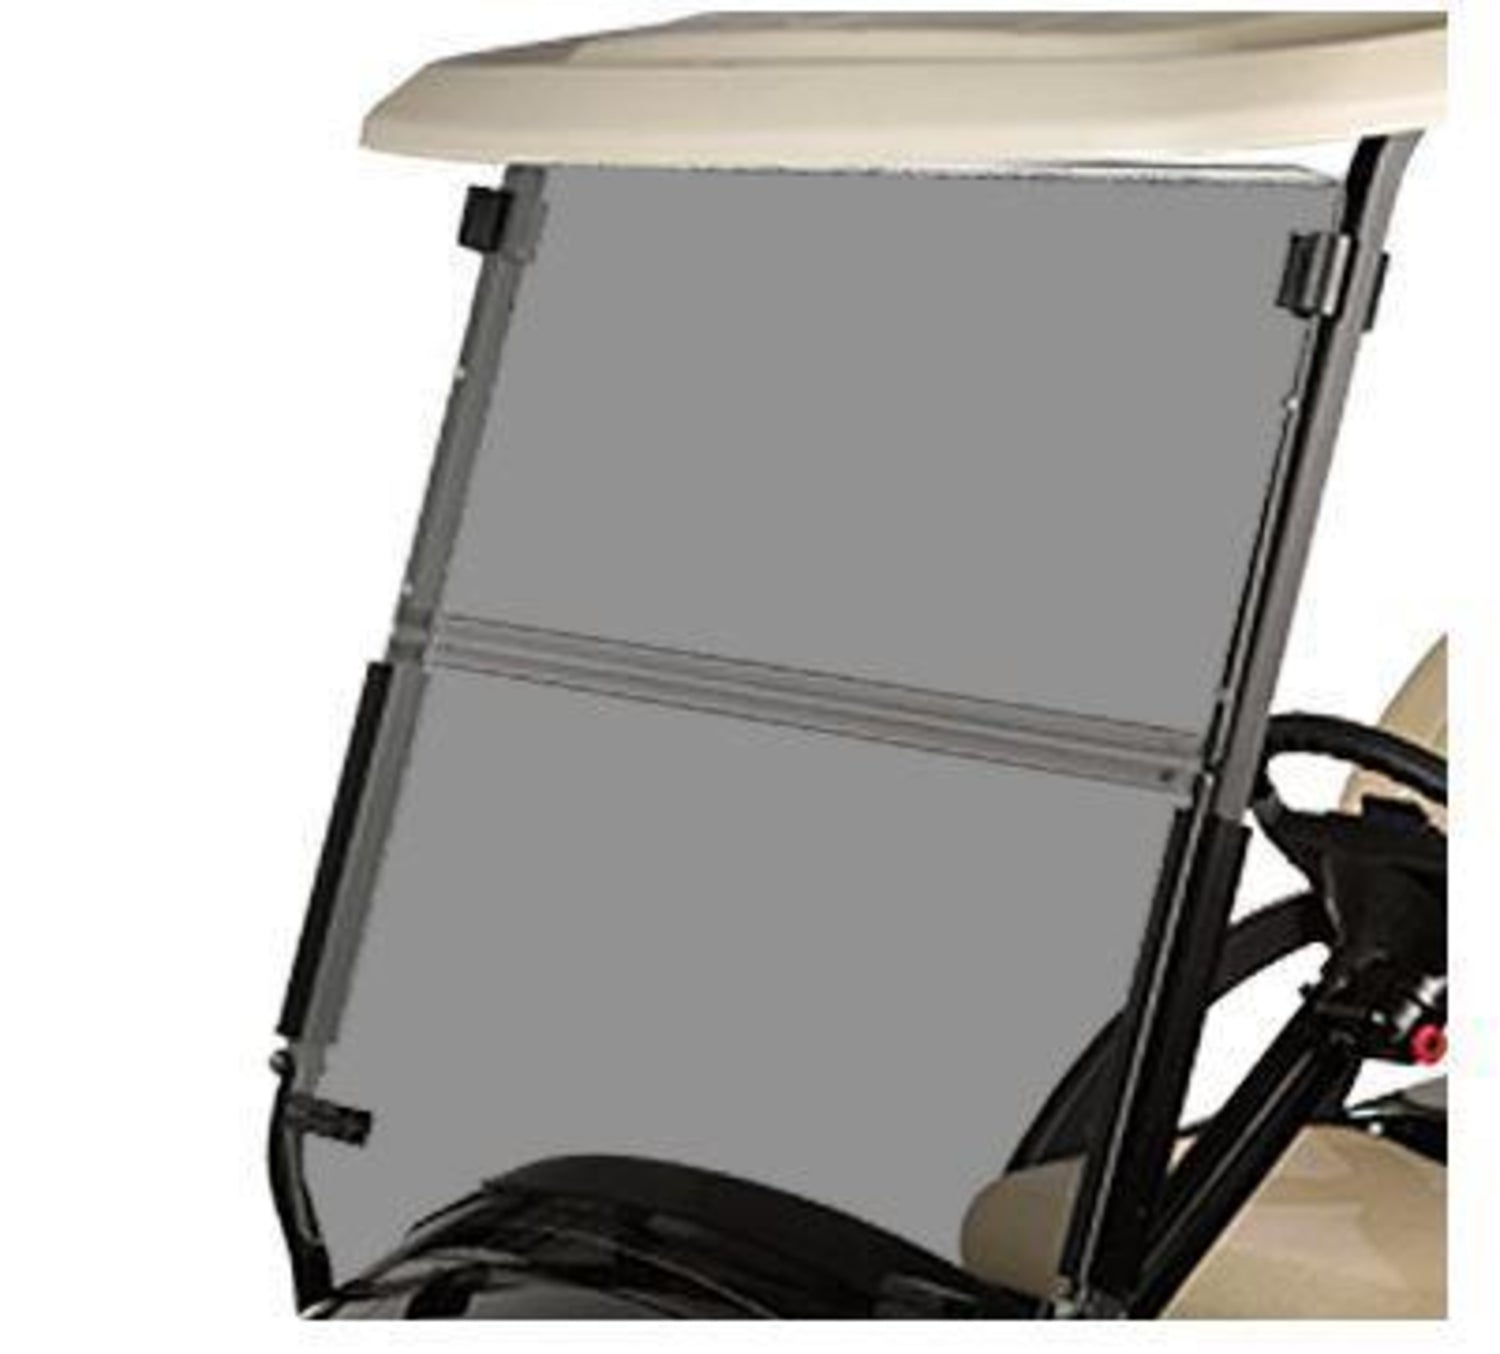 Club Car DS Tinted Hinged Windshield (Years 2000-Up)